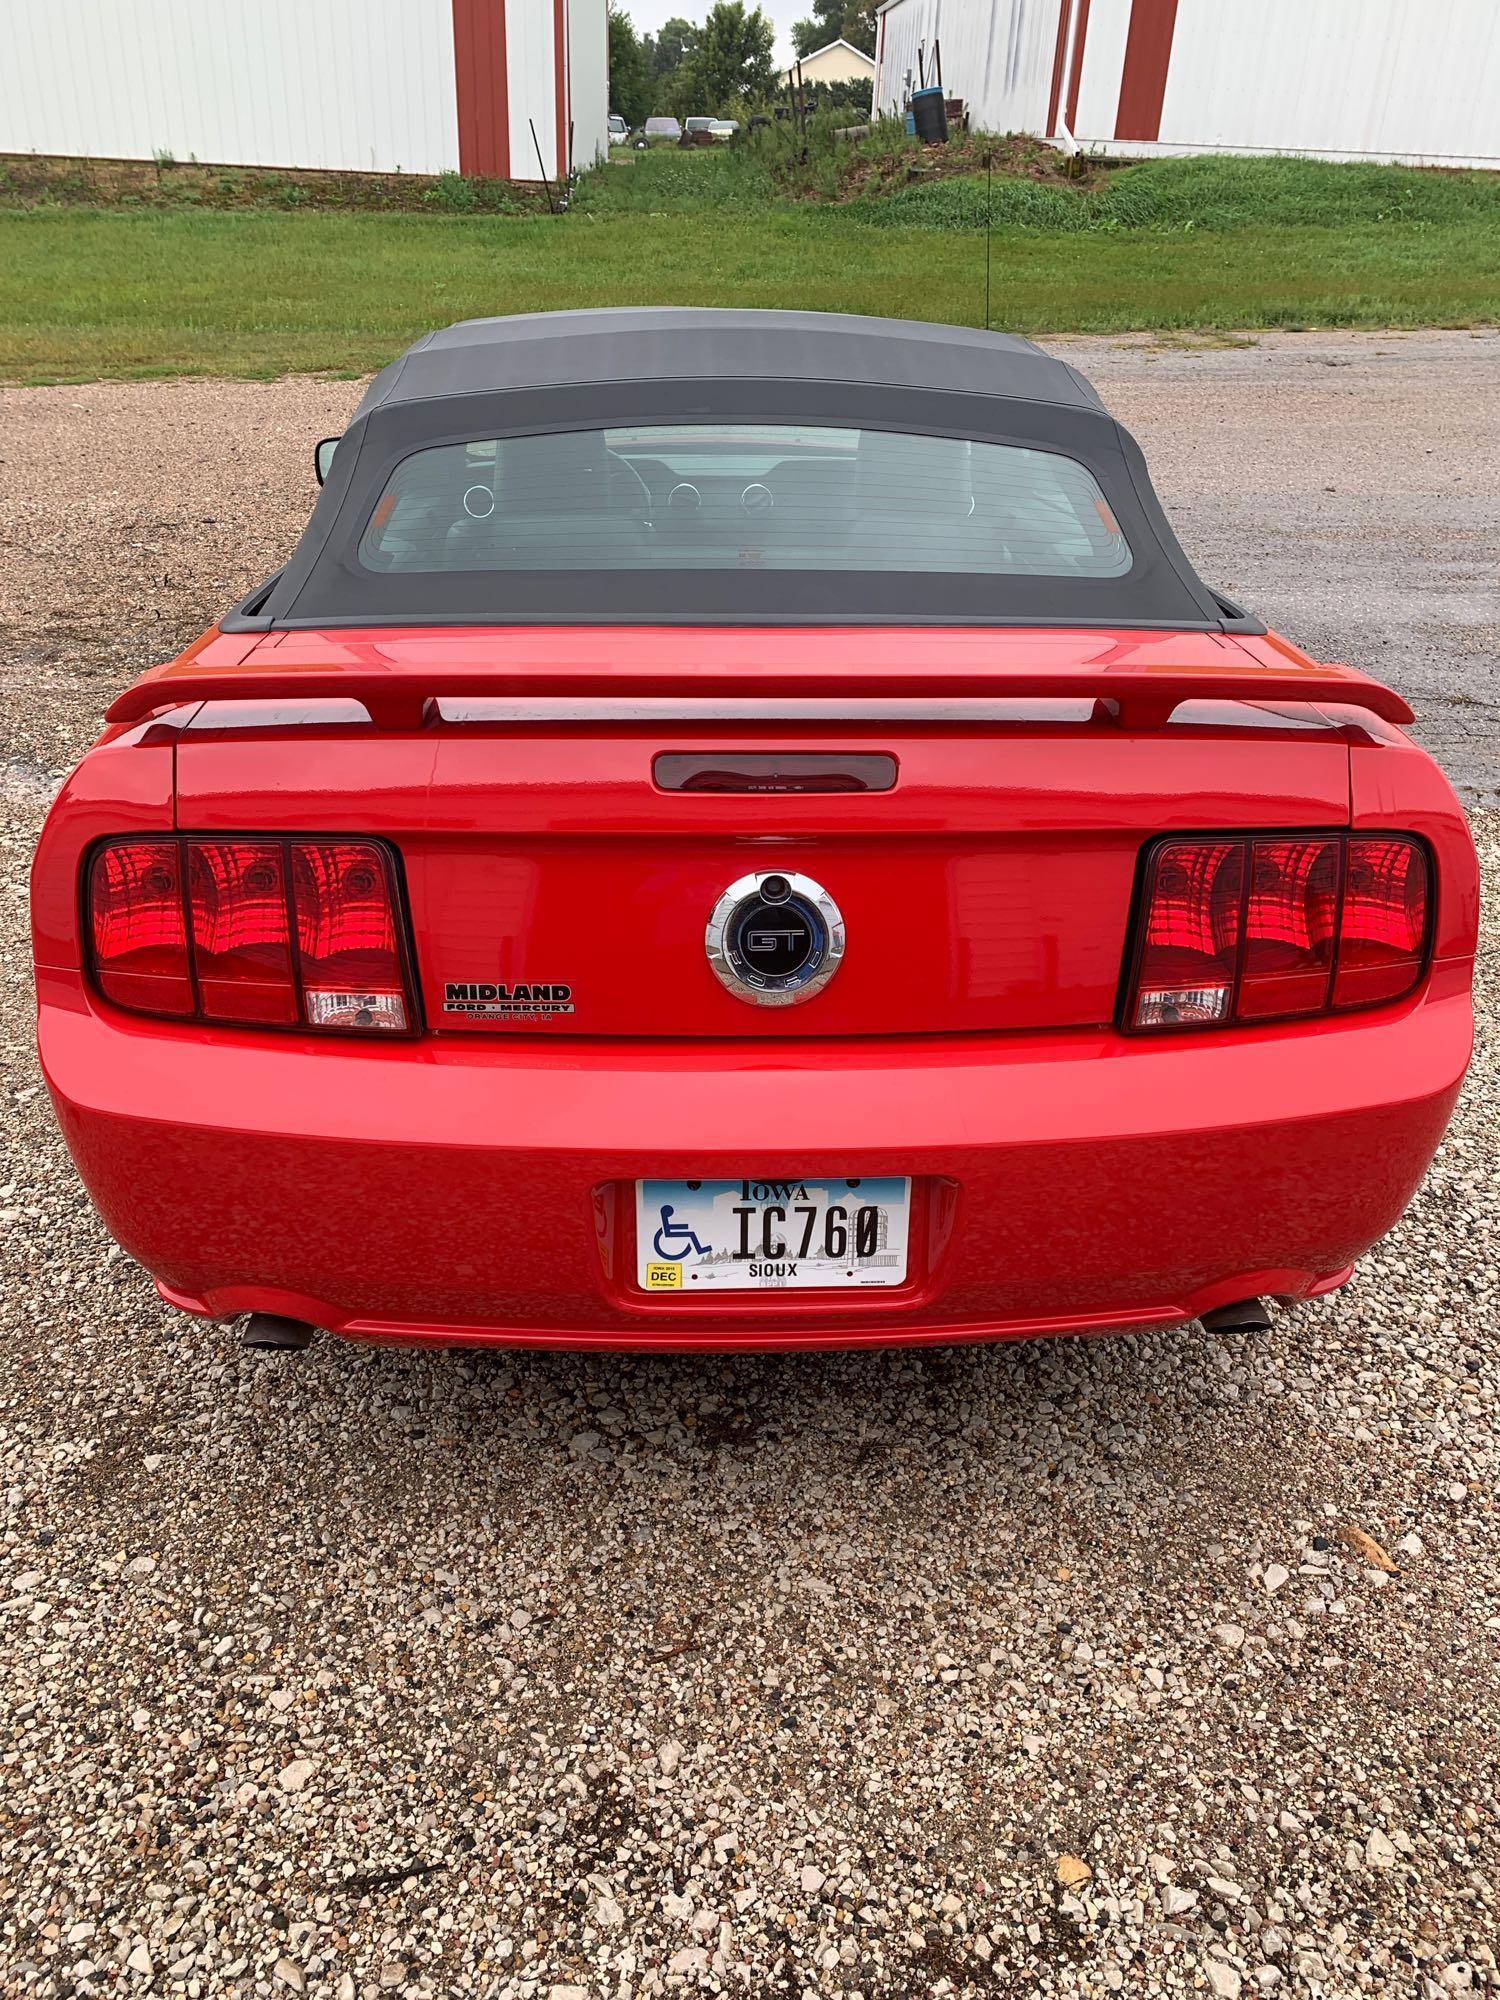 2005 Mustang Convertible Fire Engine Red Only 22064 Miles!!!!